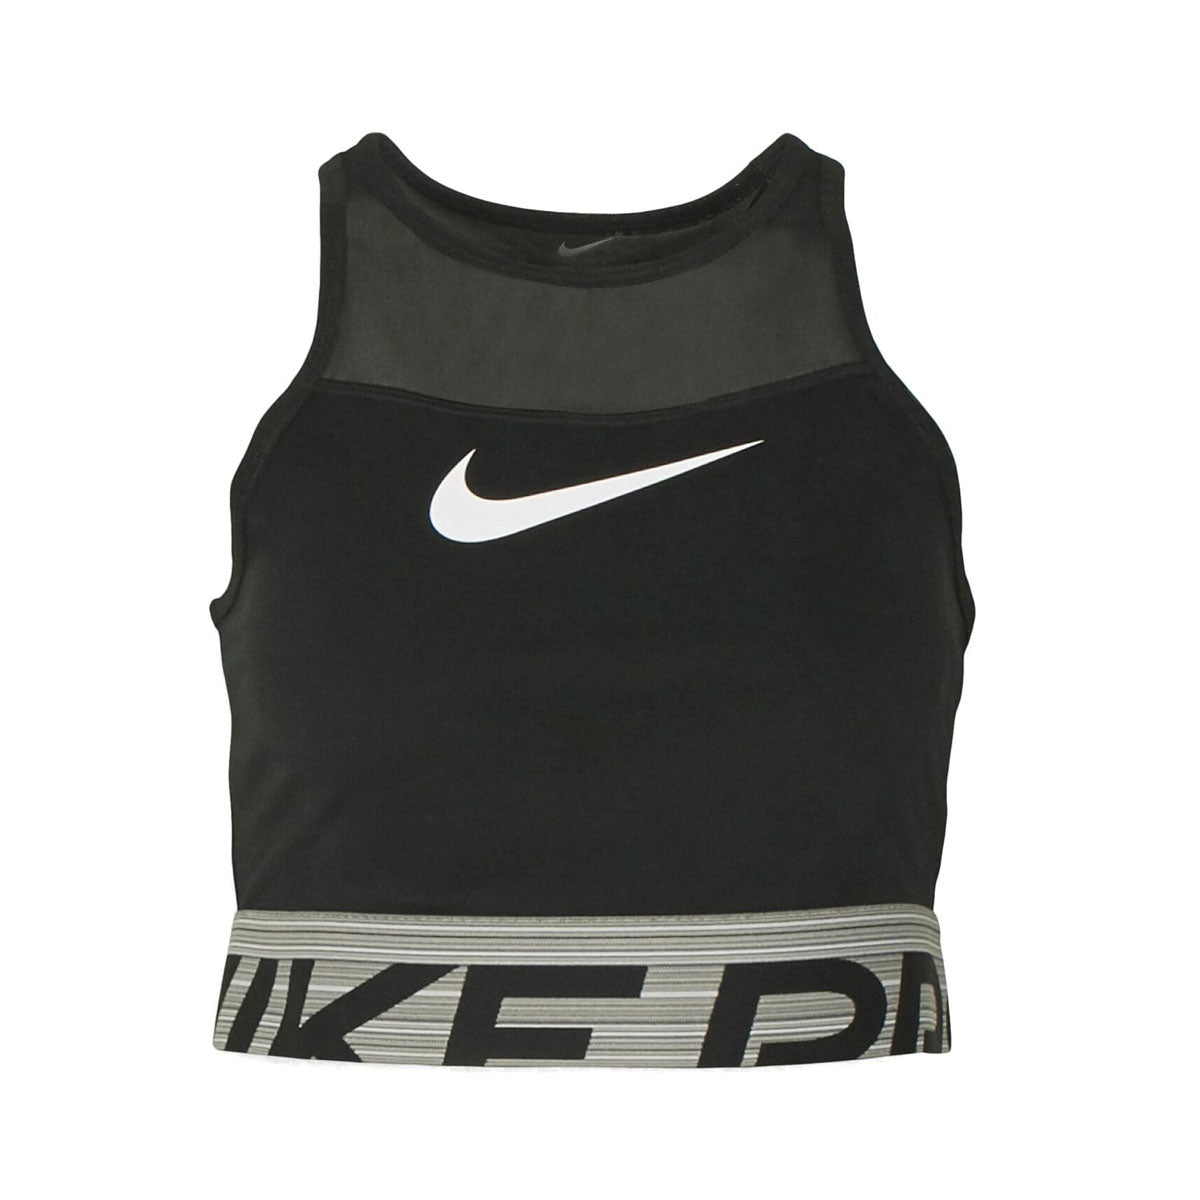 Nike Women's Pro Dri-FIT Graphic Cropped Top